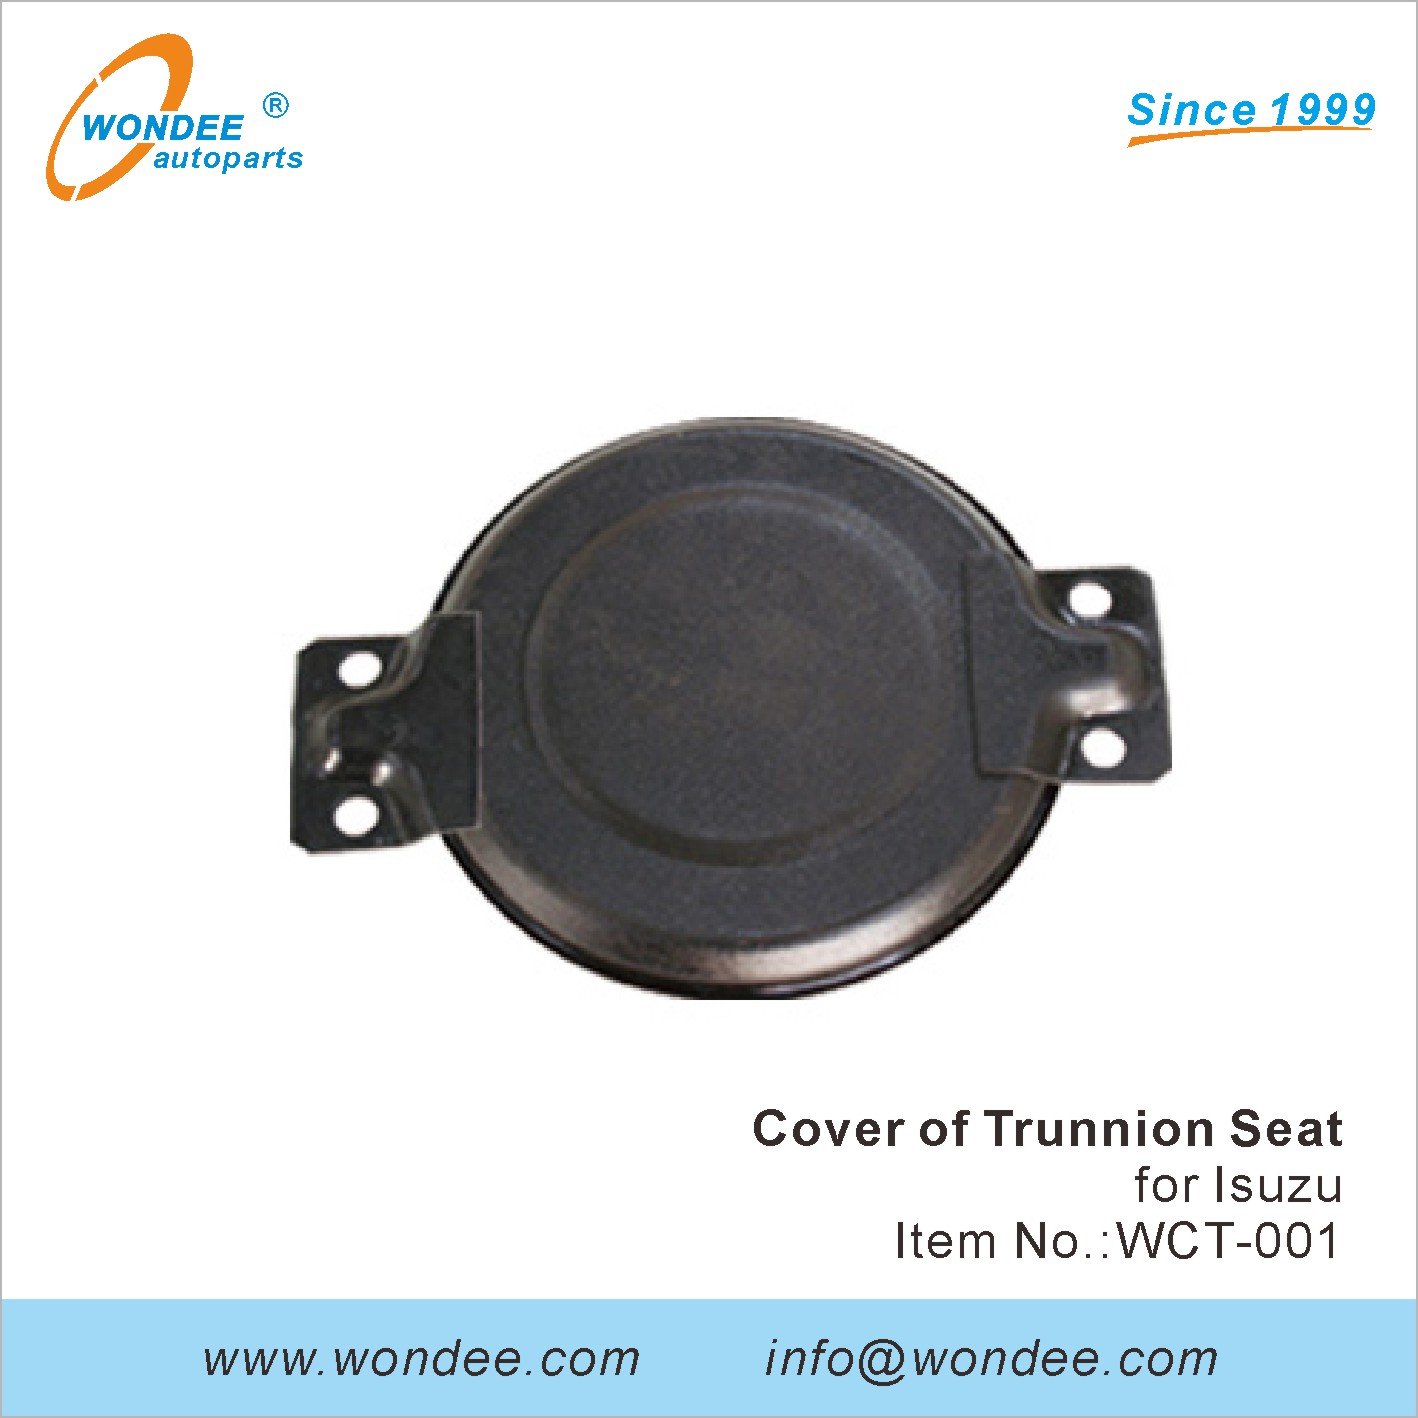 WONDEE cover of trunnion seat (1)